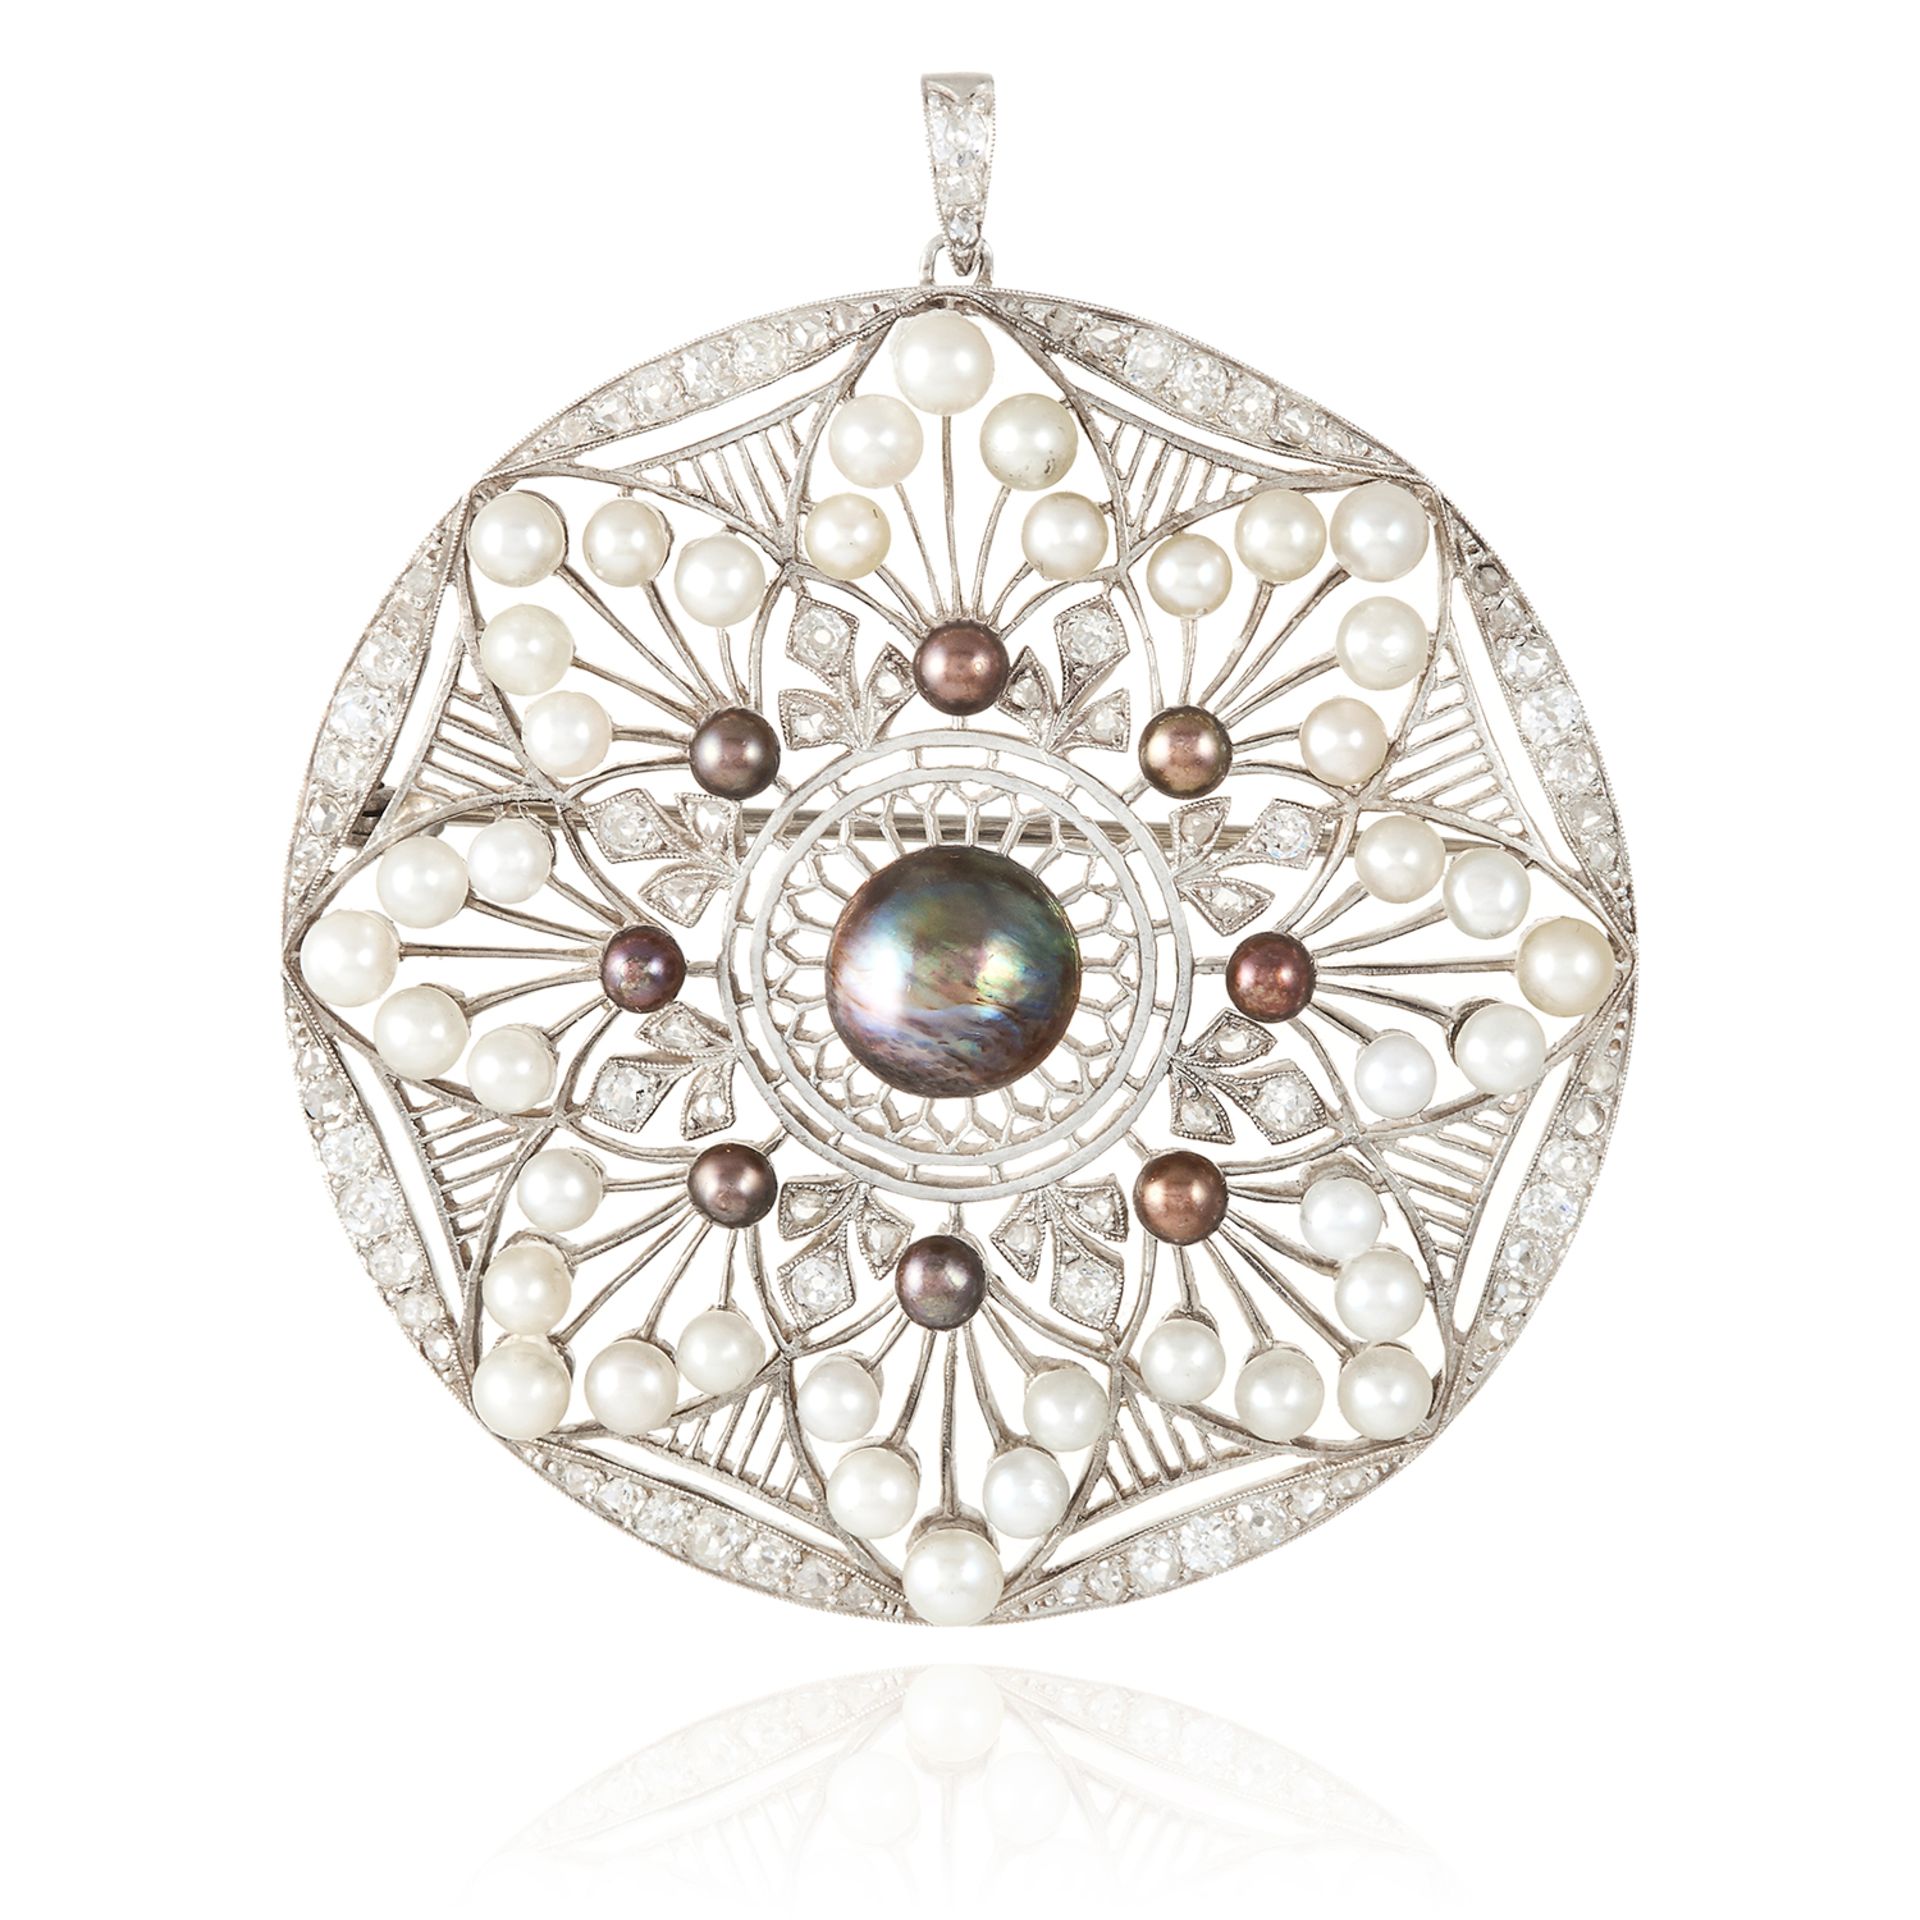 AN ANTIQUE PEARL AND DIAMOND BROOCH / PENDANT in gold or platinum, in circular form jewelled with